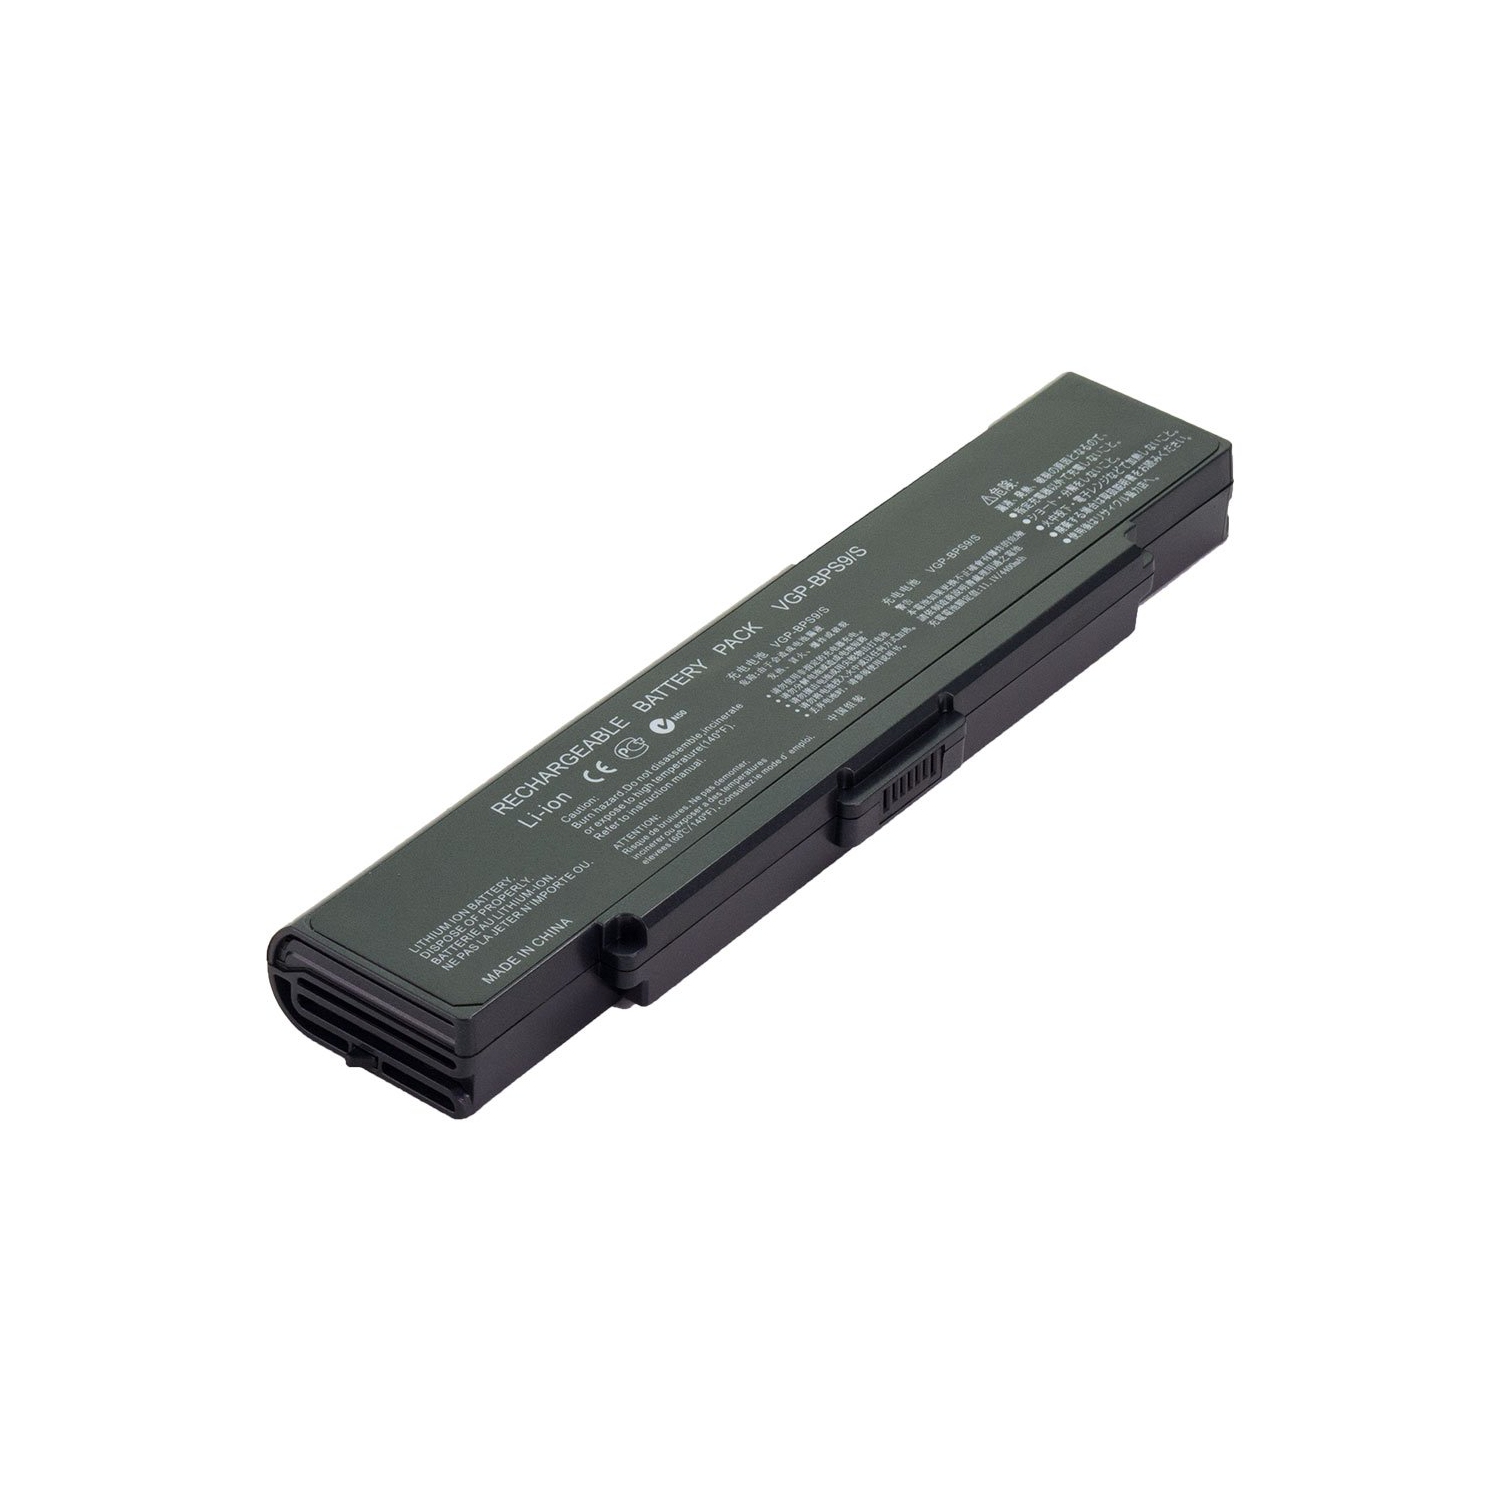 Laptop Battery Replacement for Sony VAIO VGN-CR540E/P, VGP-BPS10, VGP-BPS10A, VGP-BPS9, VGP-BPS9/S, VGP-BPS9A/B